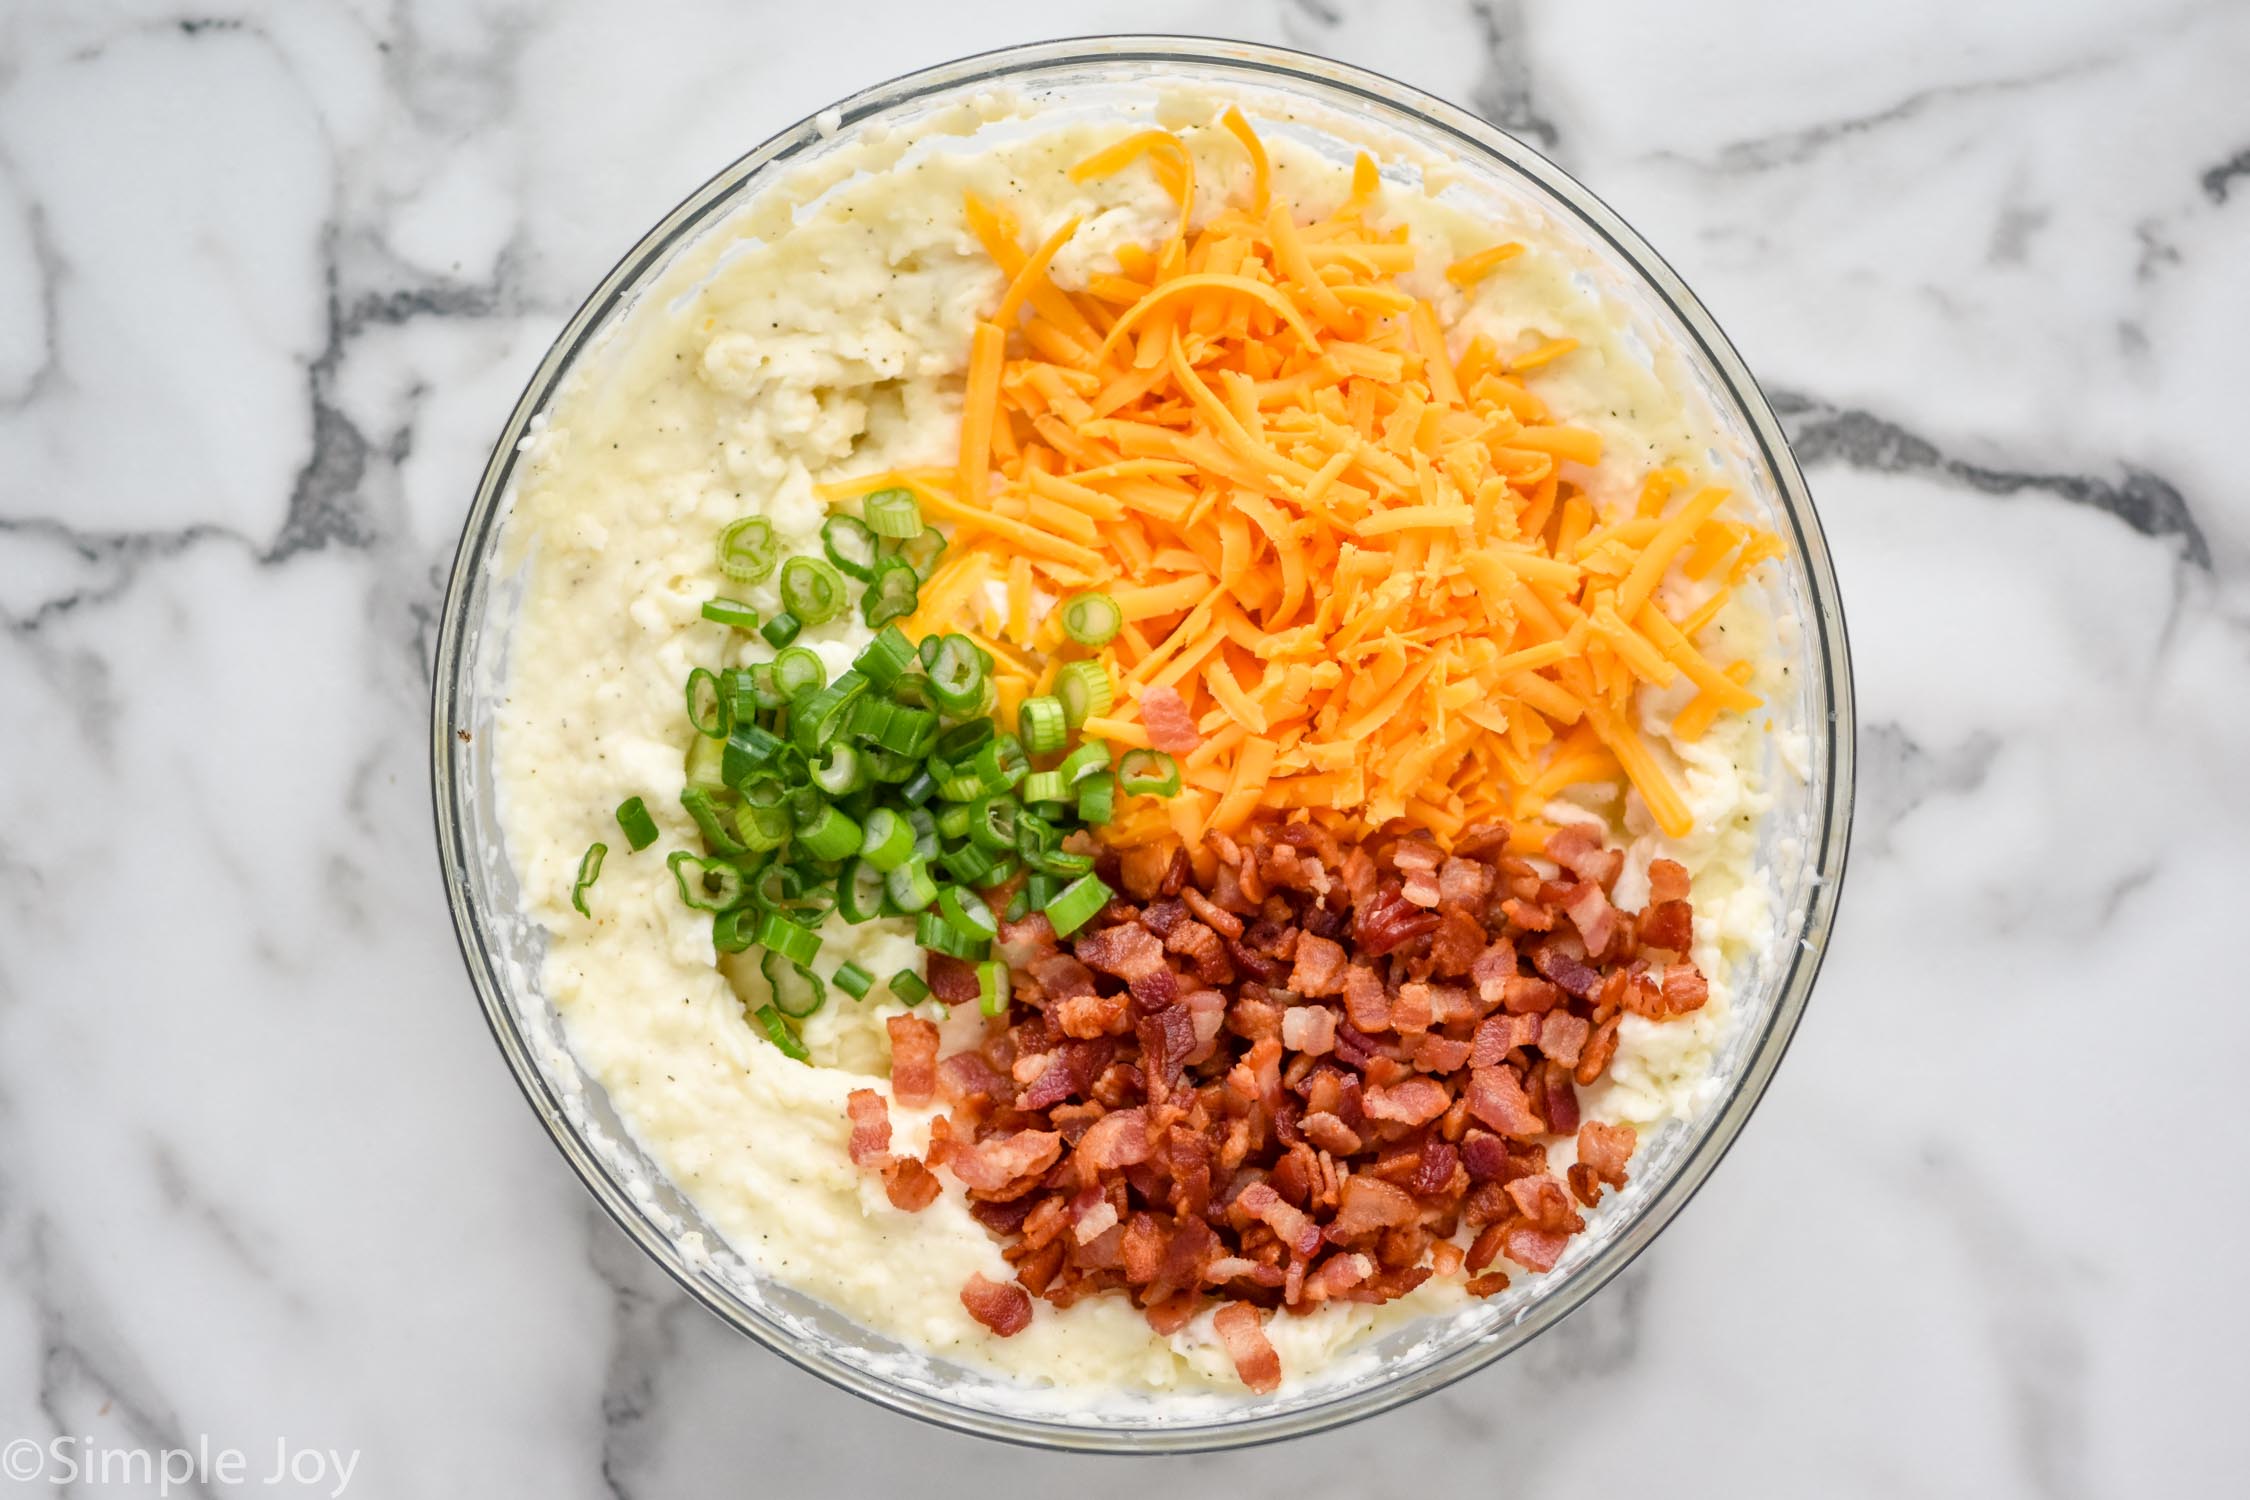 Overhead photo of a mixing bowl of ingredients for Twice Baked Potato Casserole